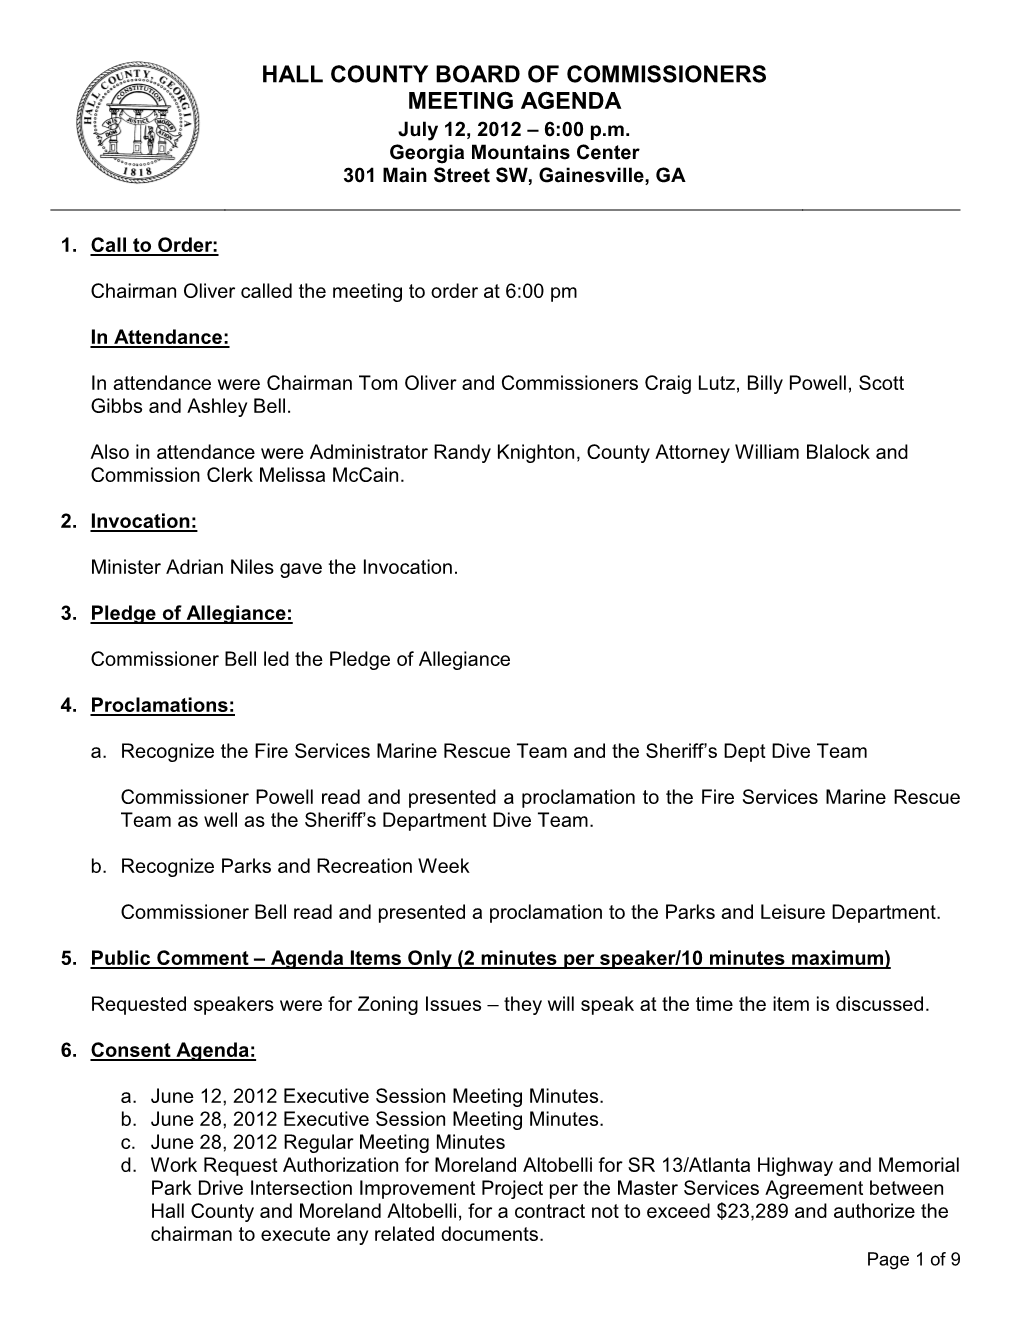 HALL COUNTY BOARD of COMMISSIONERS MEETING AGENDA July 12, 2012 – 6:00 P.M